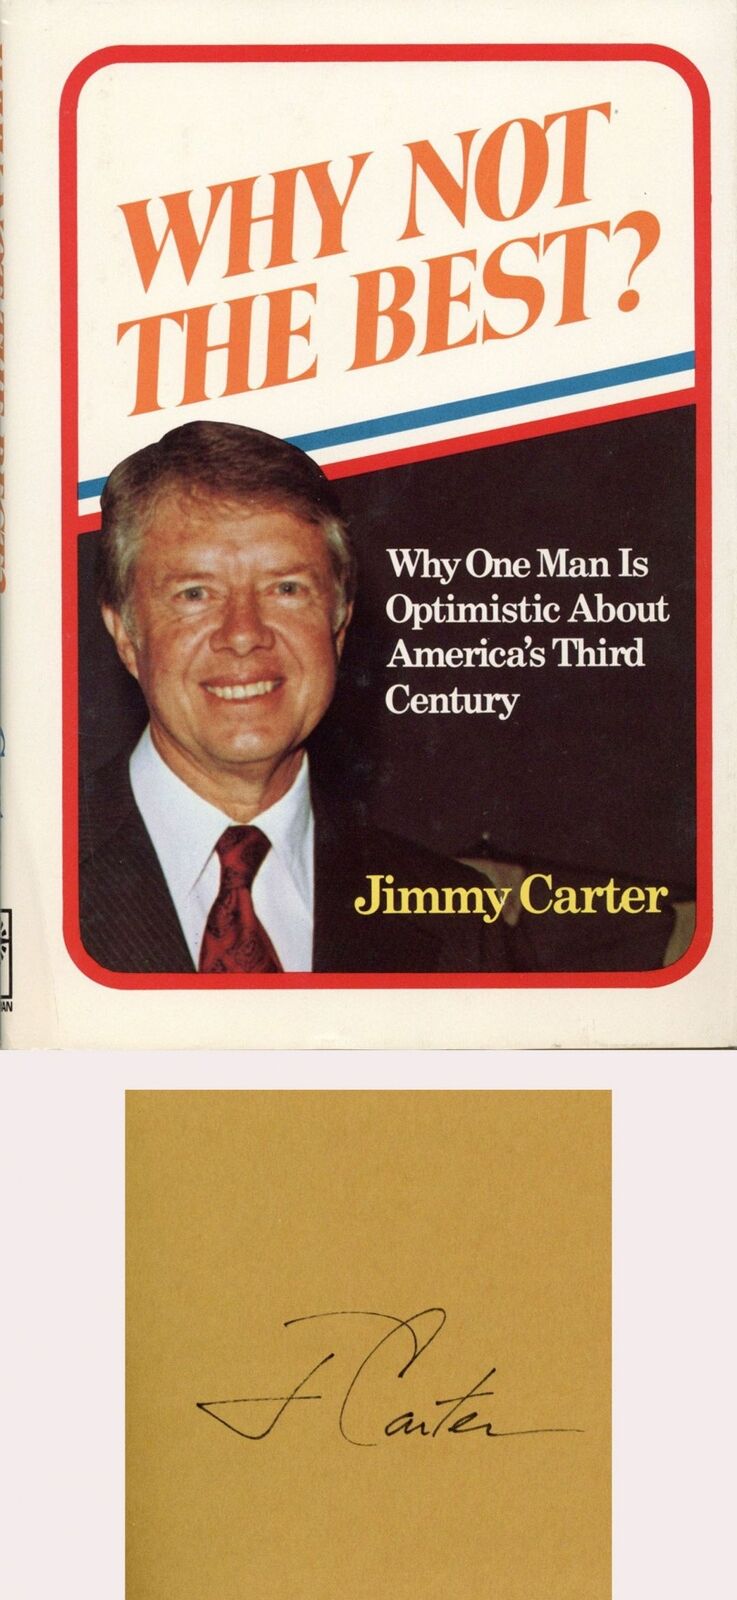 Jimmy Carter Autographed Book - Why Not the Best? - Published While Campaigning 